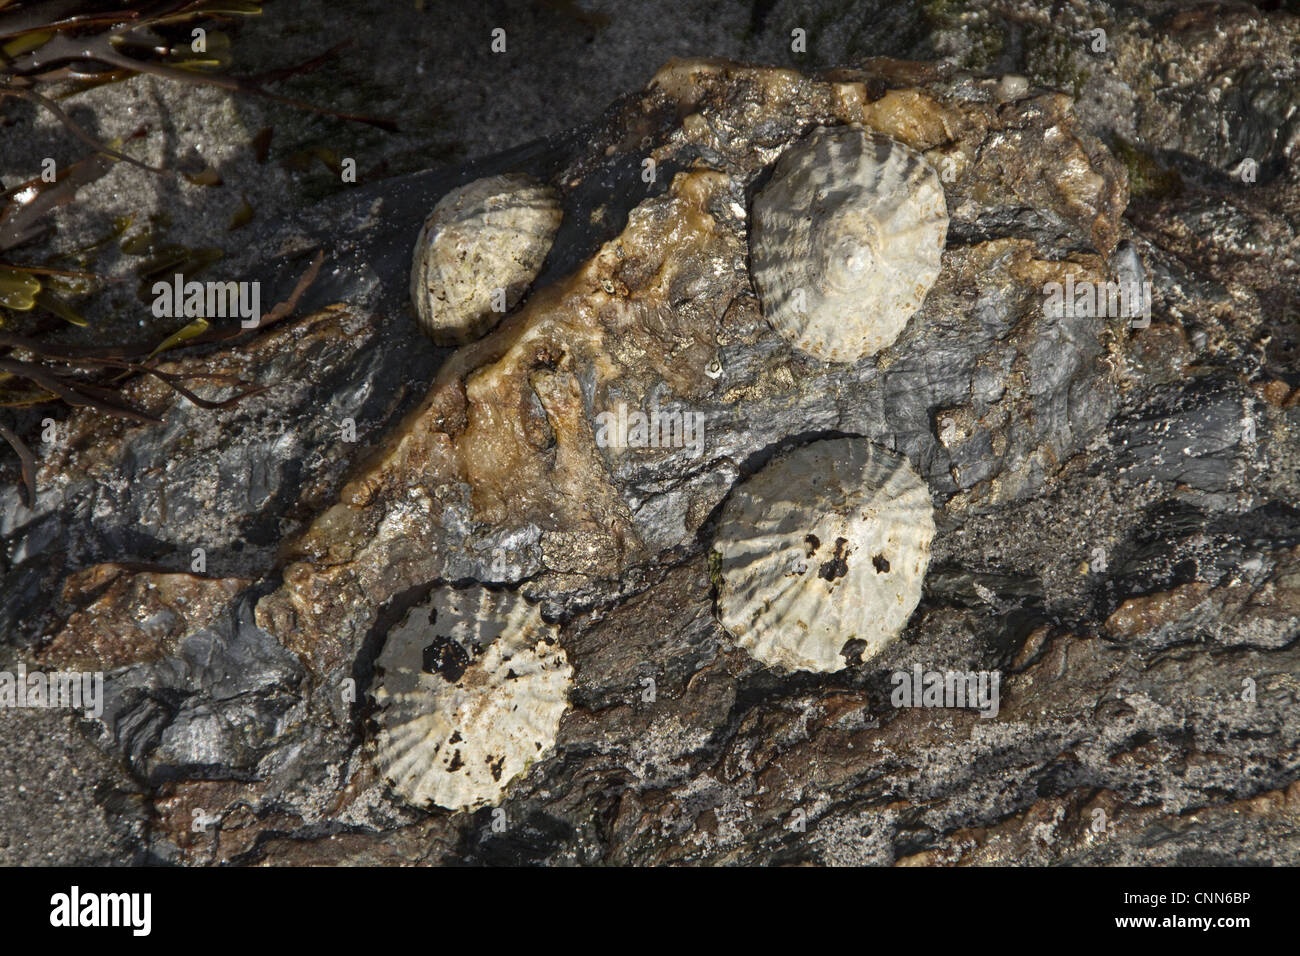 The 'common limpet' edible species sea snail gills typical true limpet marine gastropod mollusc in family Patellidae. Stock Photo